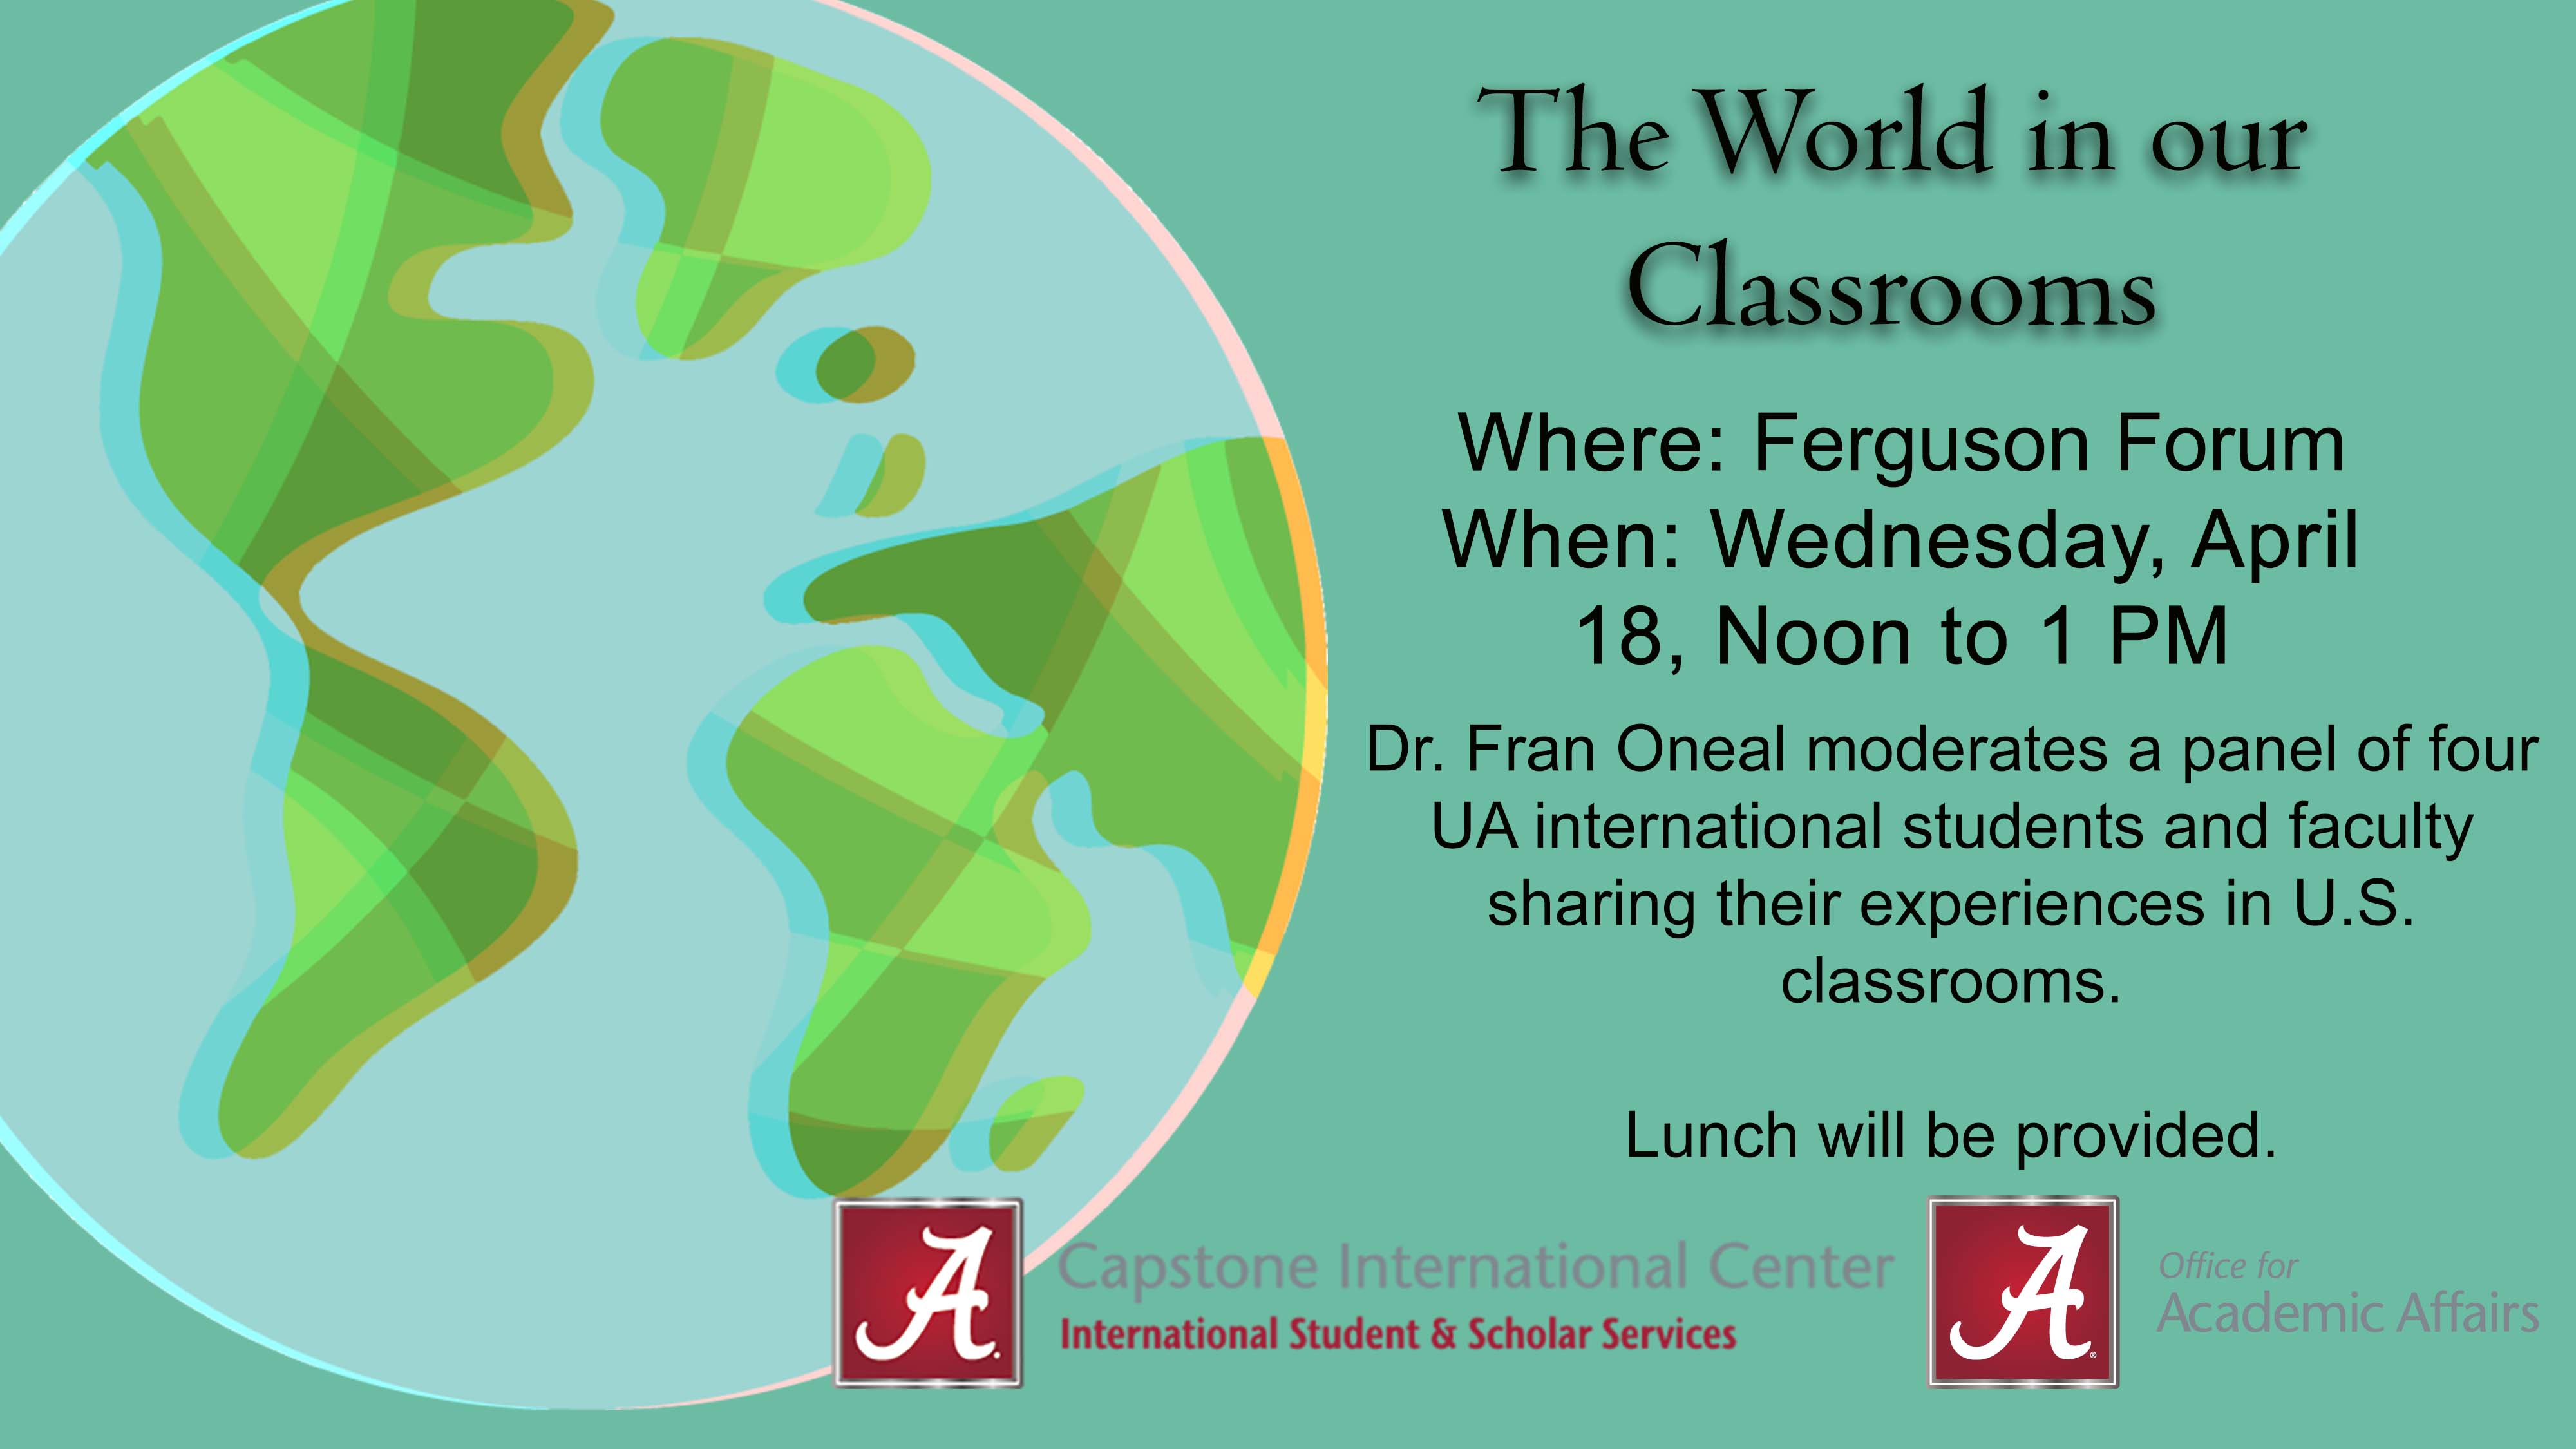 The World in Our Classrooms: An Inclusive Classroom Symposium